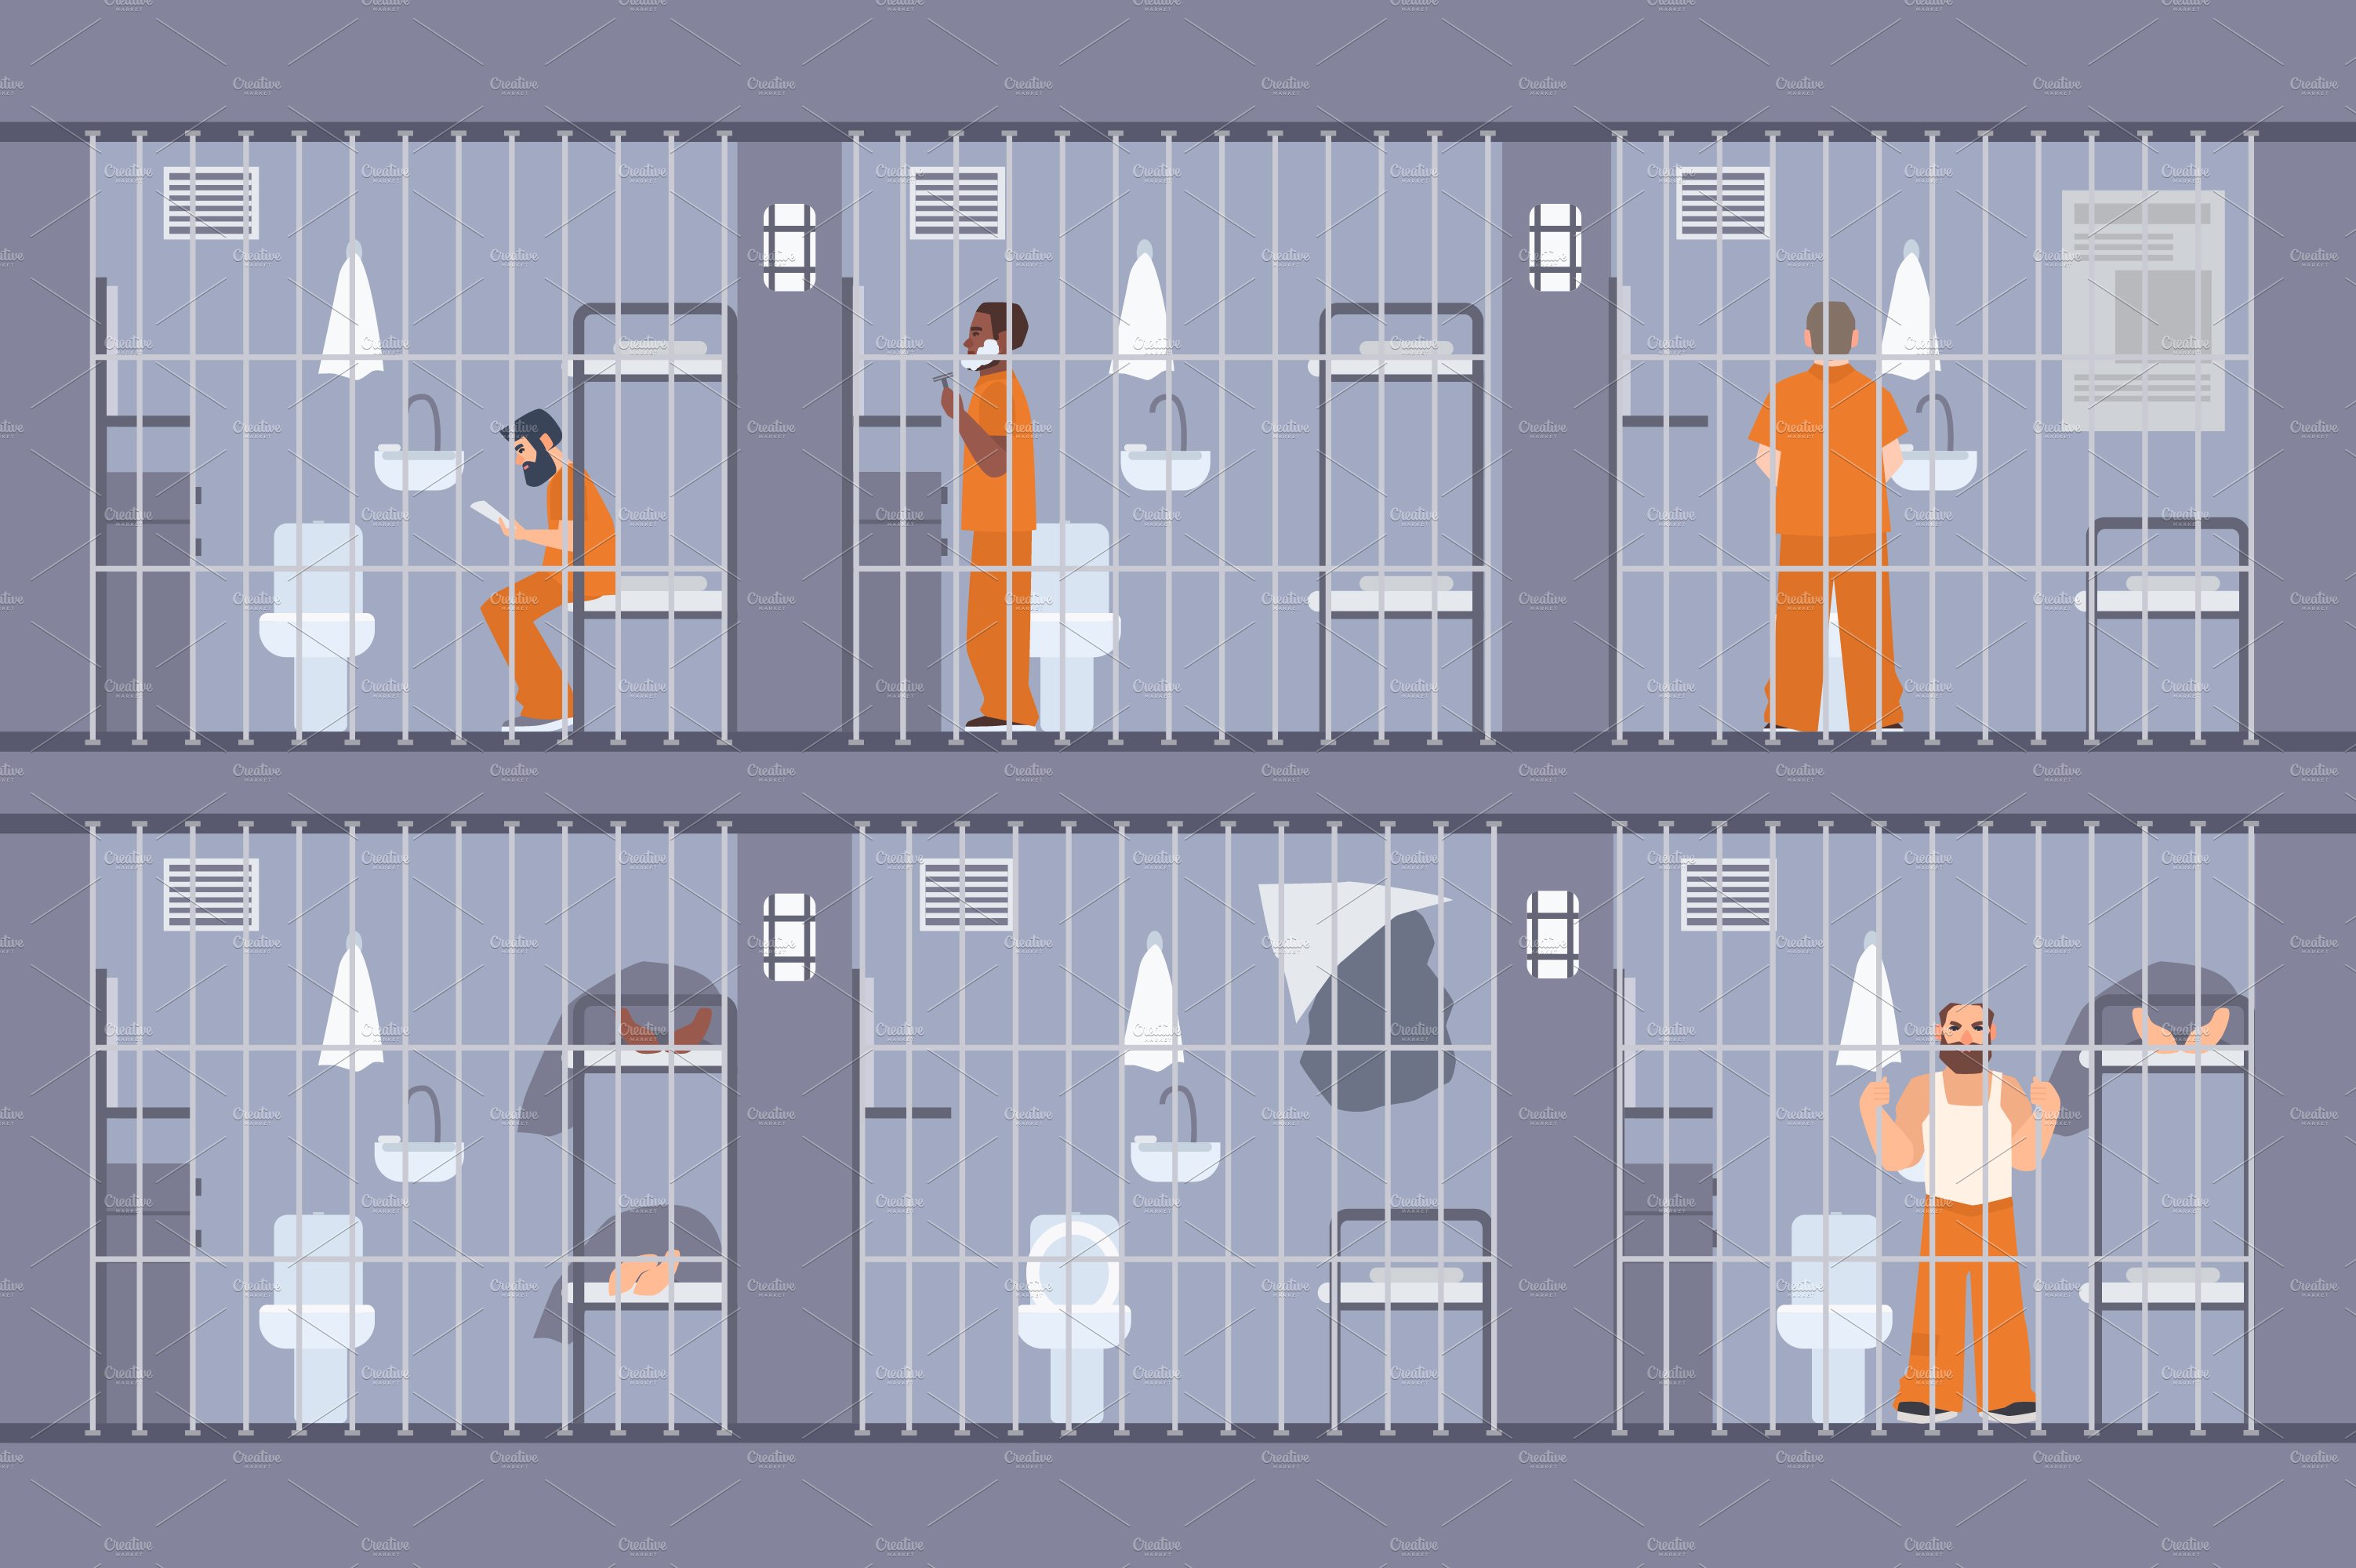 Prisoners behind the bars cover image.